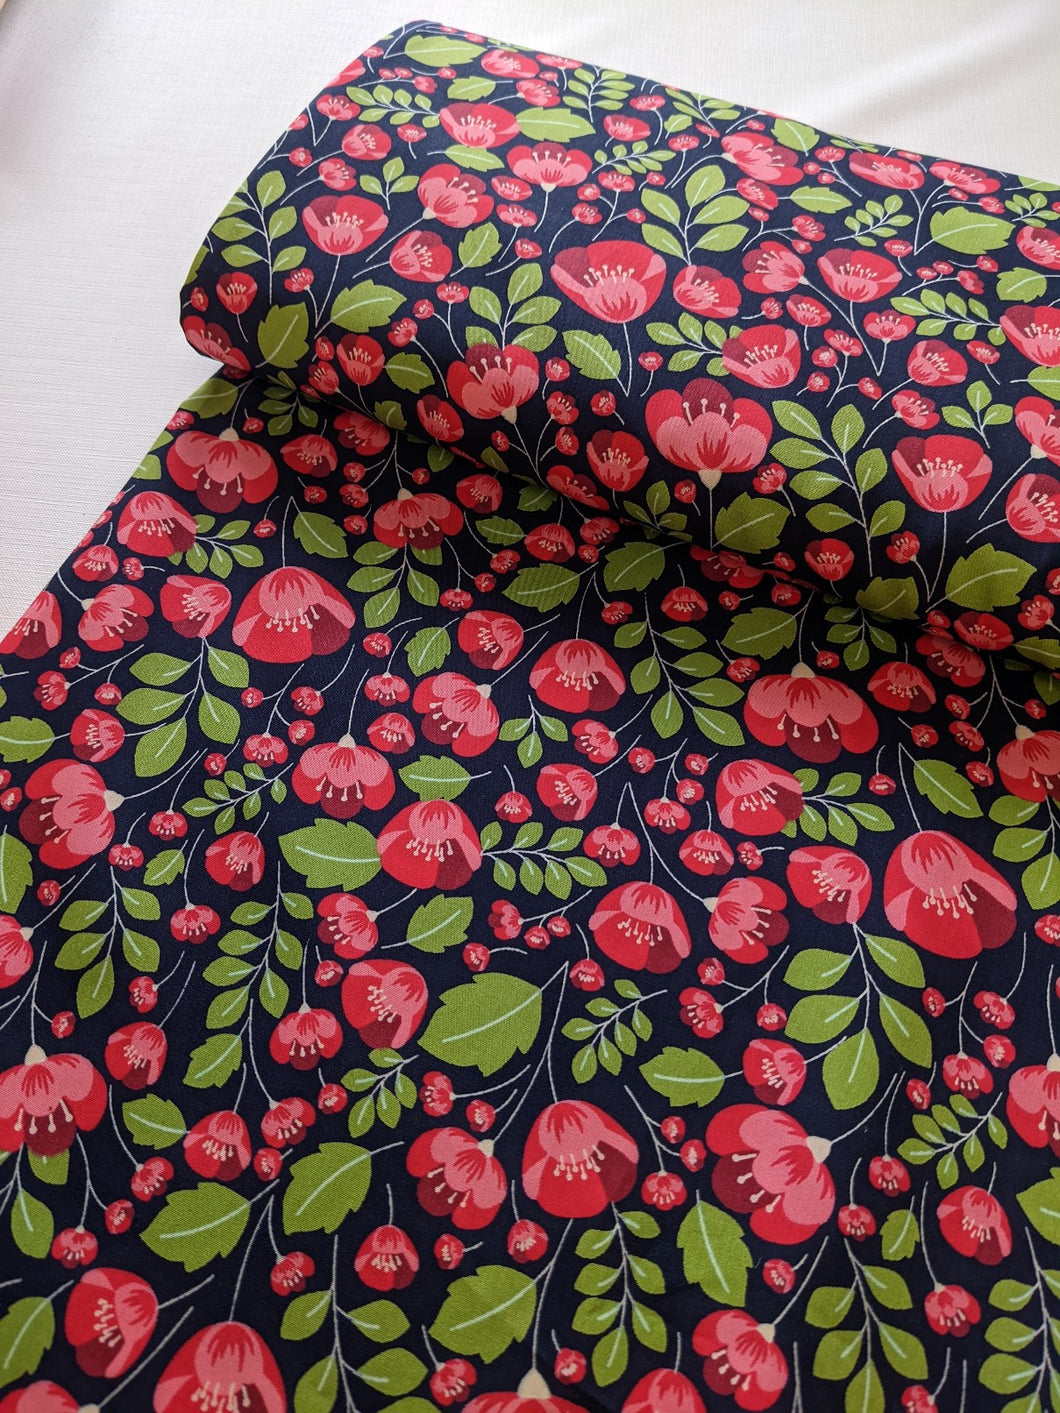 Red poppies fabric 100% cotton fabric - 1/2 mtr